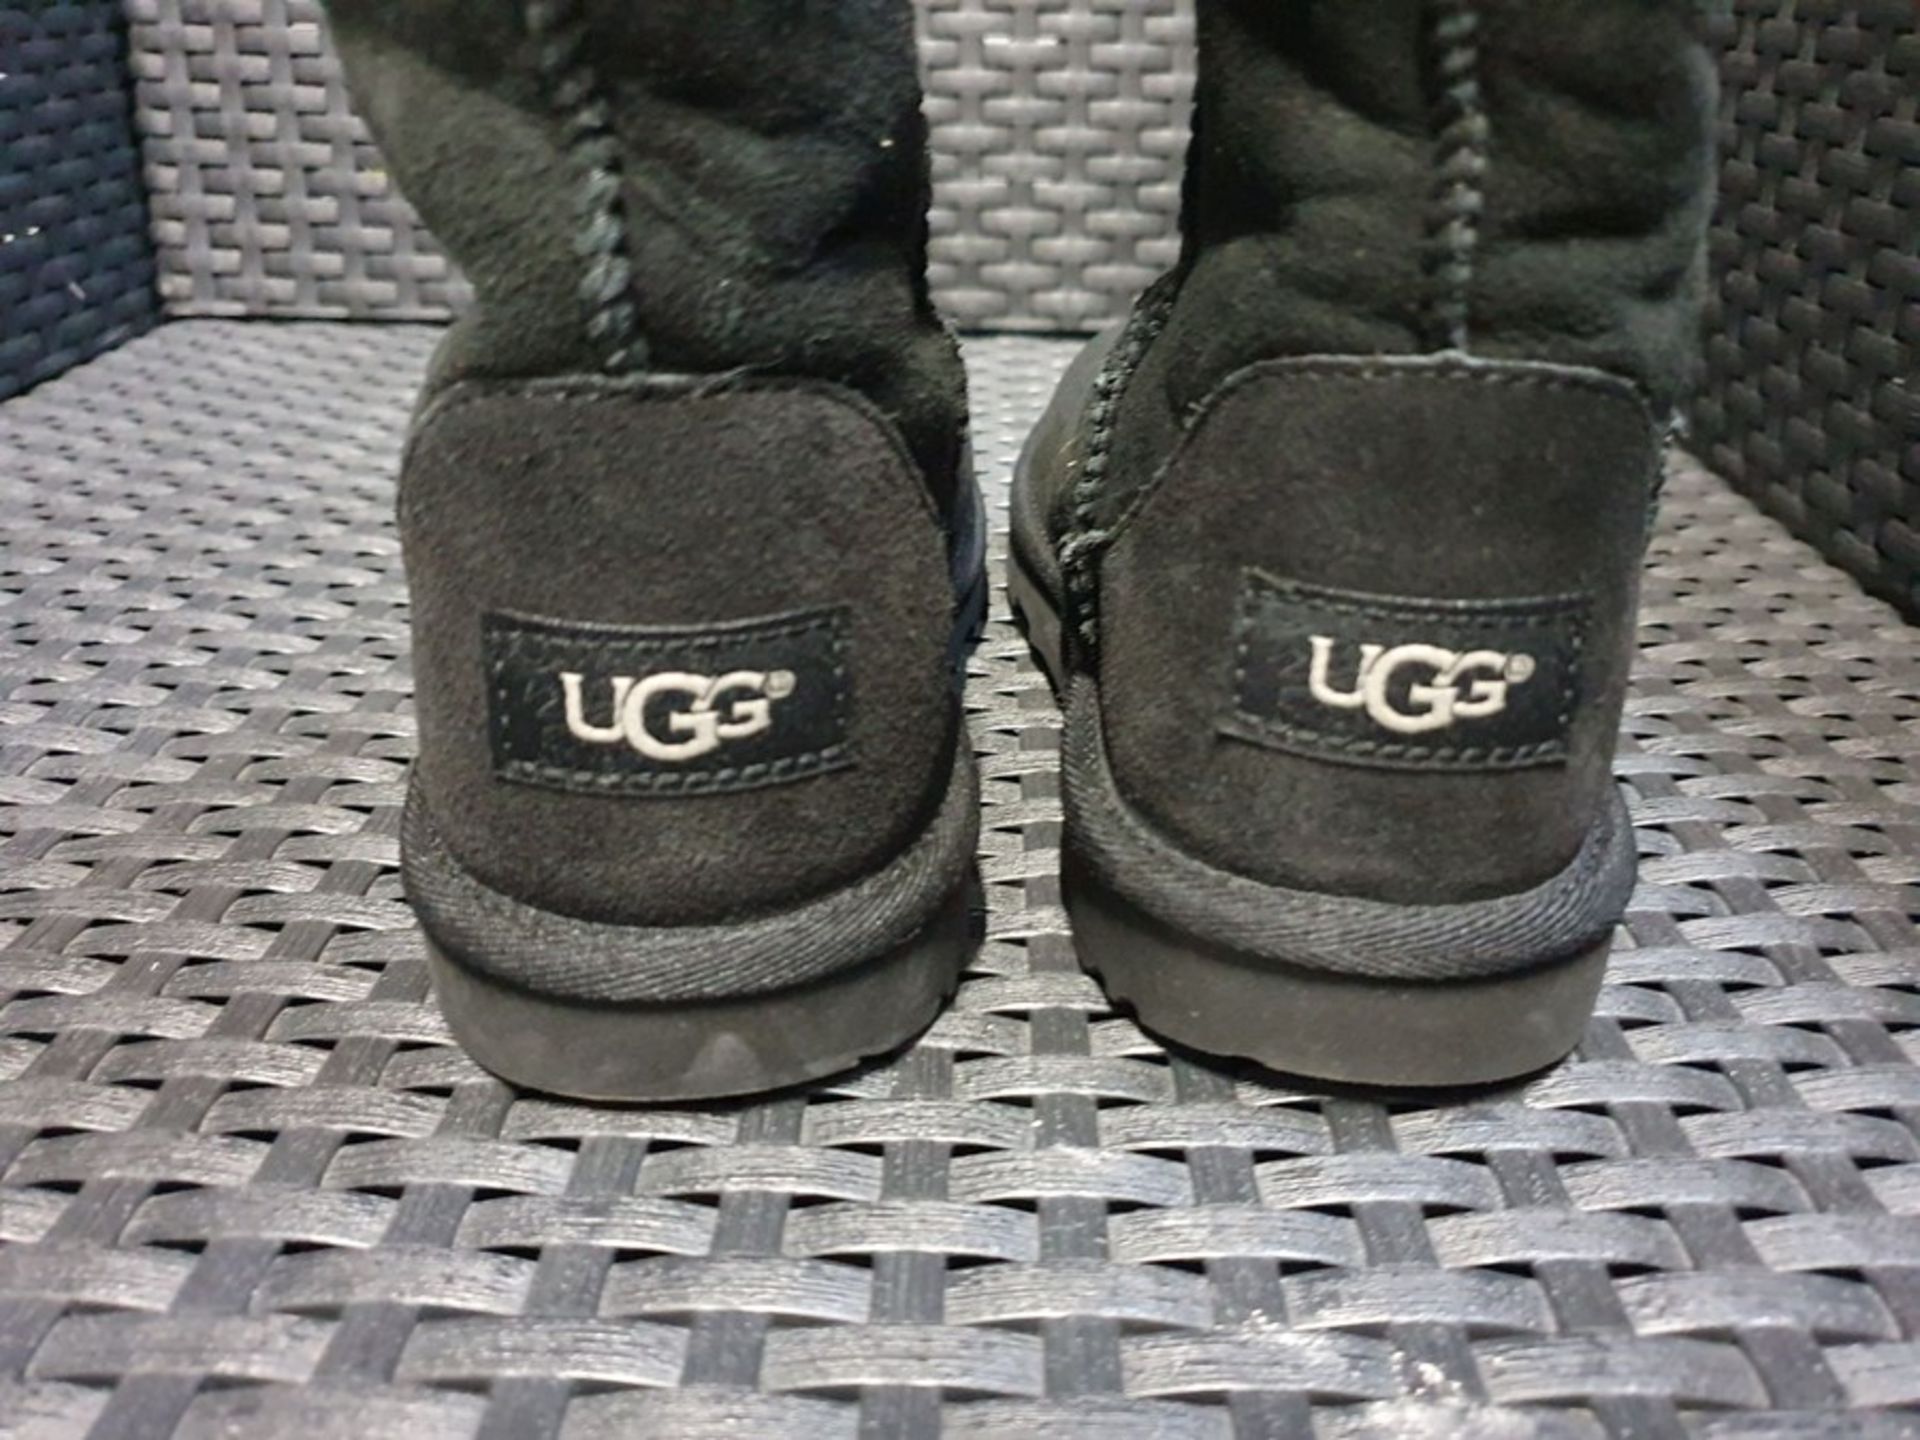 ONE PAIR OF UGG CLASSIC II SUEDE BOOTS WITH FAUX FUR LINING IN BLACK - SIZE UK 2. RRP £145.00. GRADE - Image 2 of 3